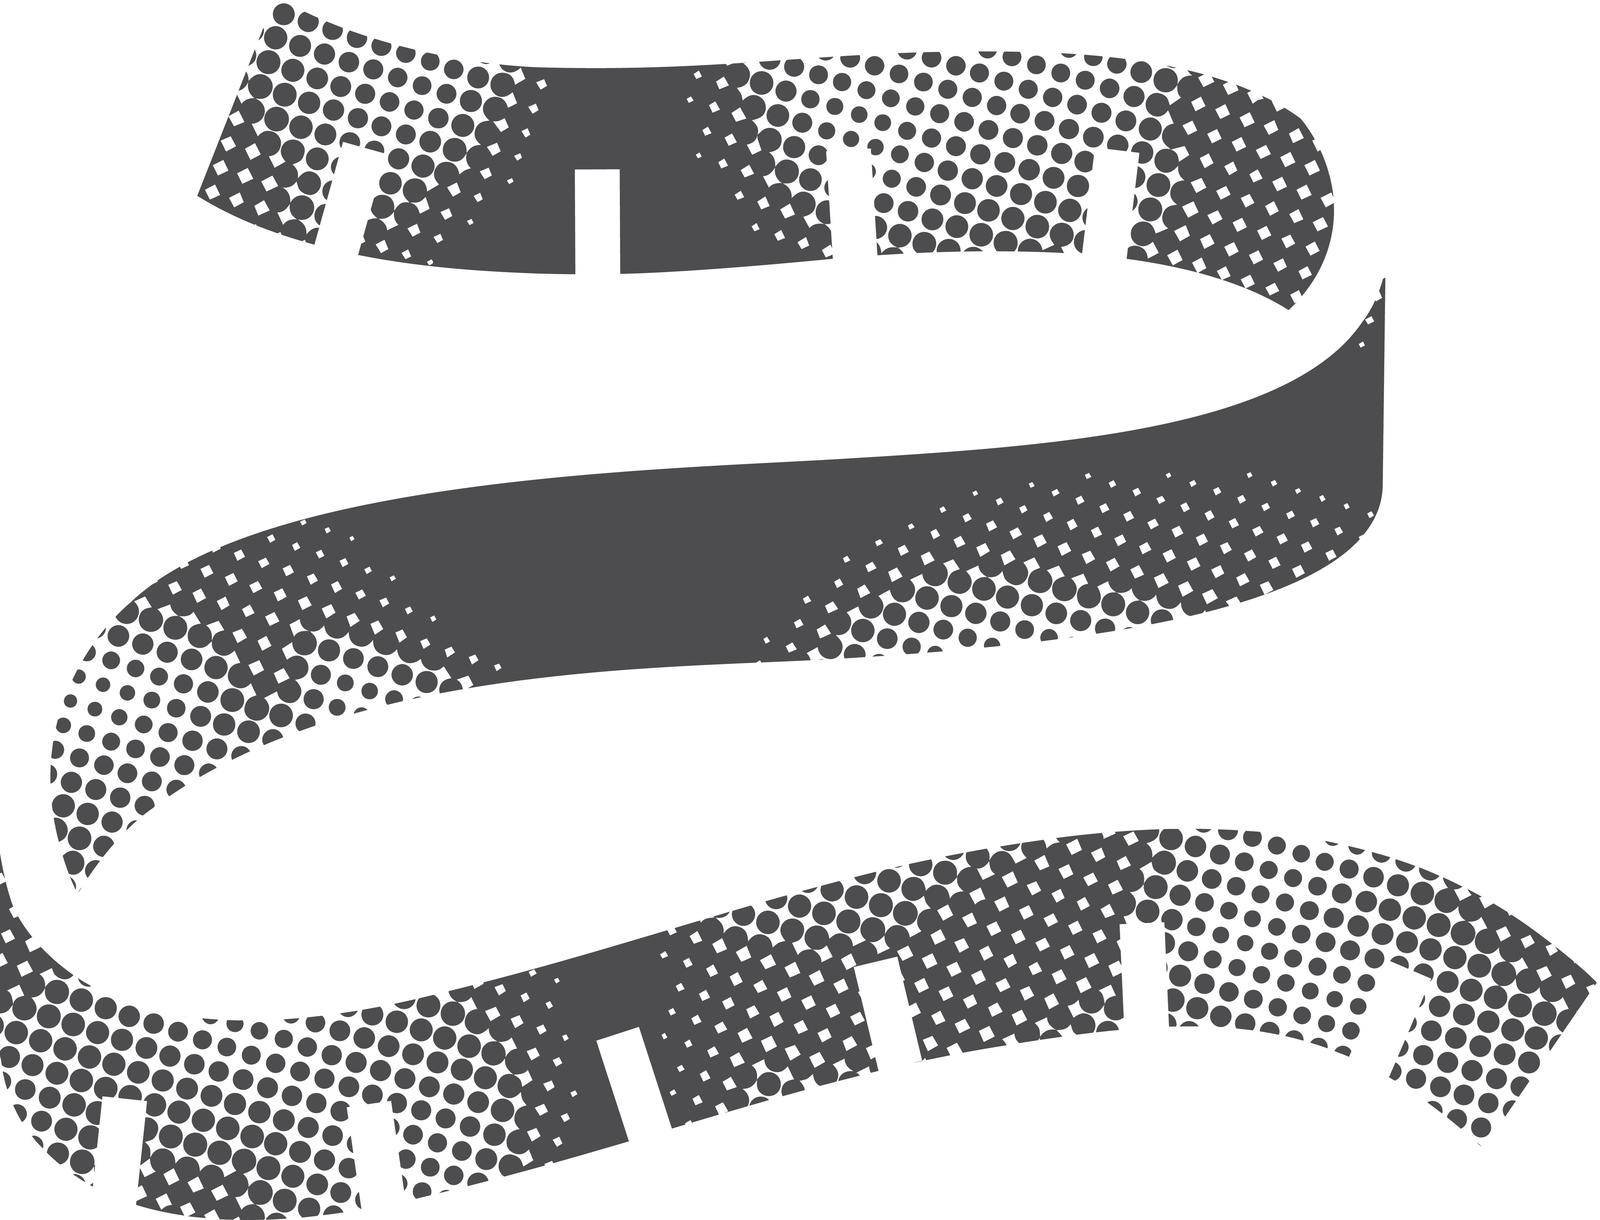 Measuring tape icon in halftone style. Black and white monochrome vector illustration.